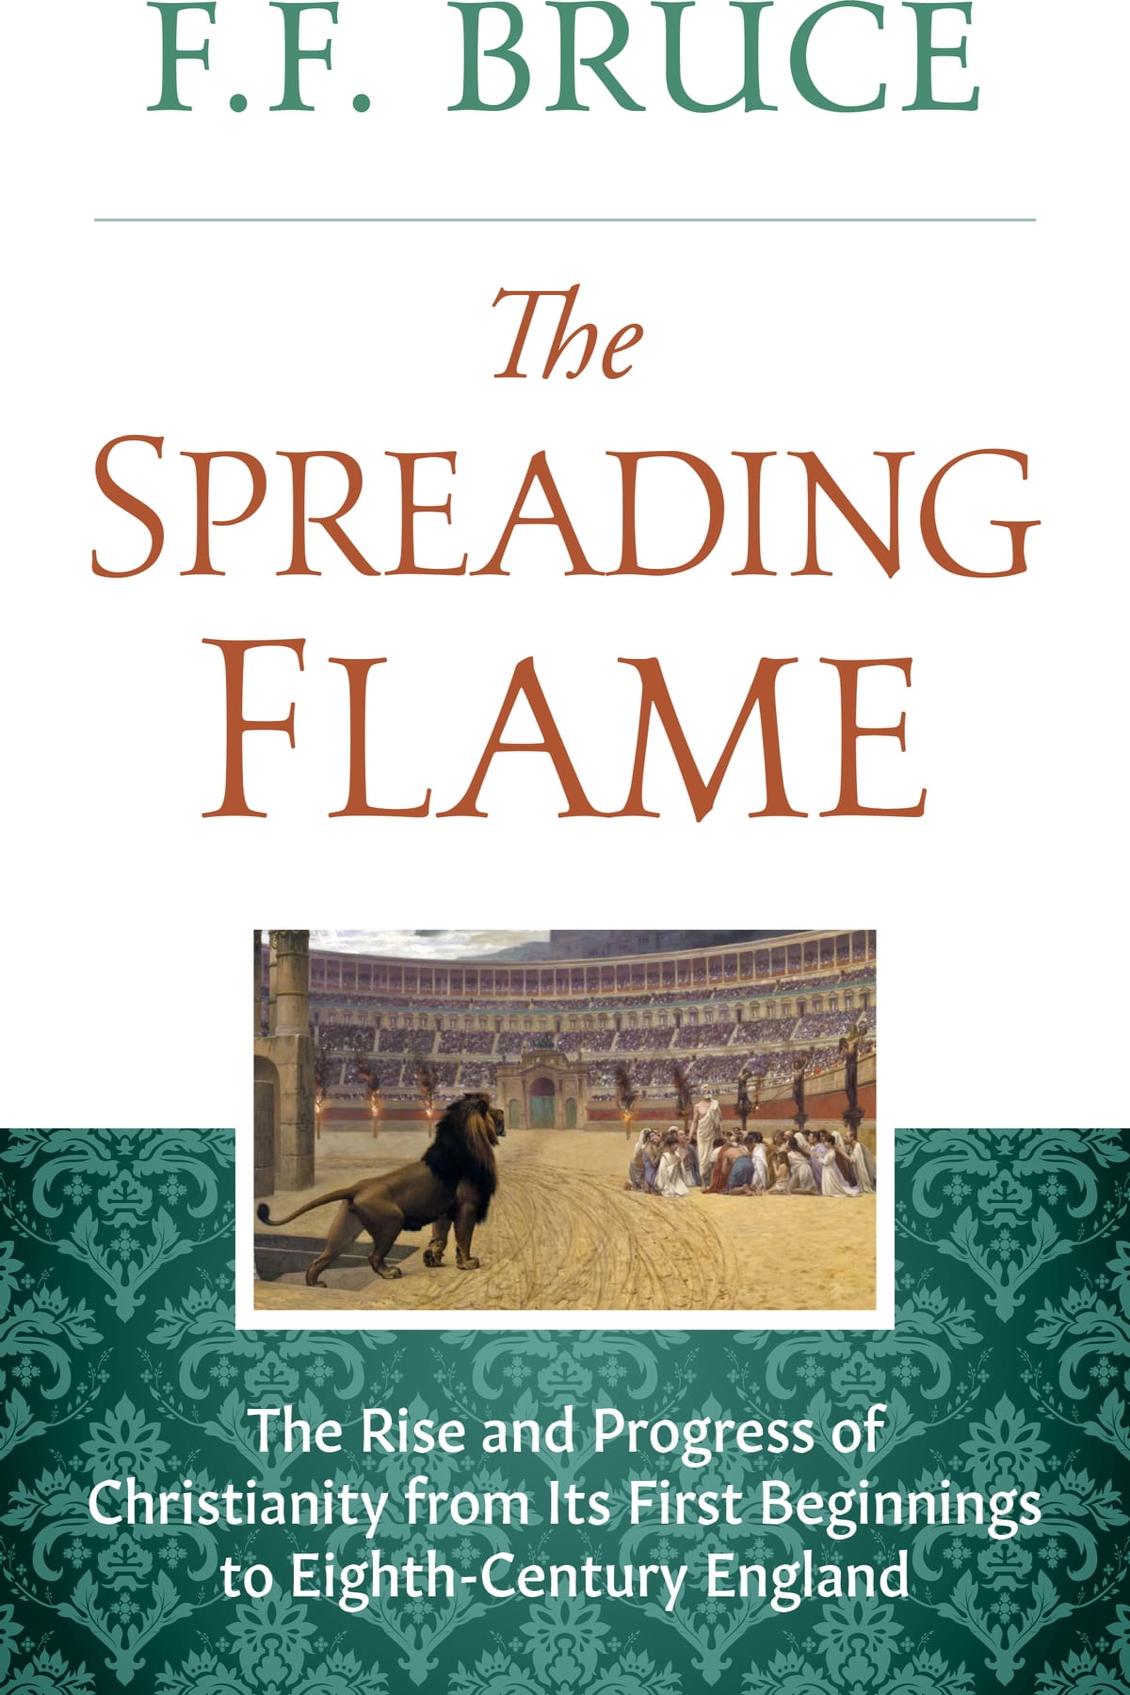 The Spreading Flame